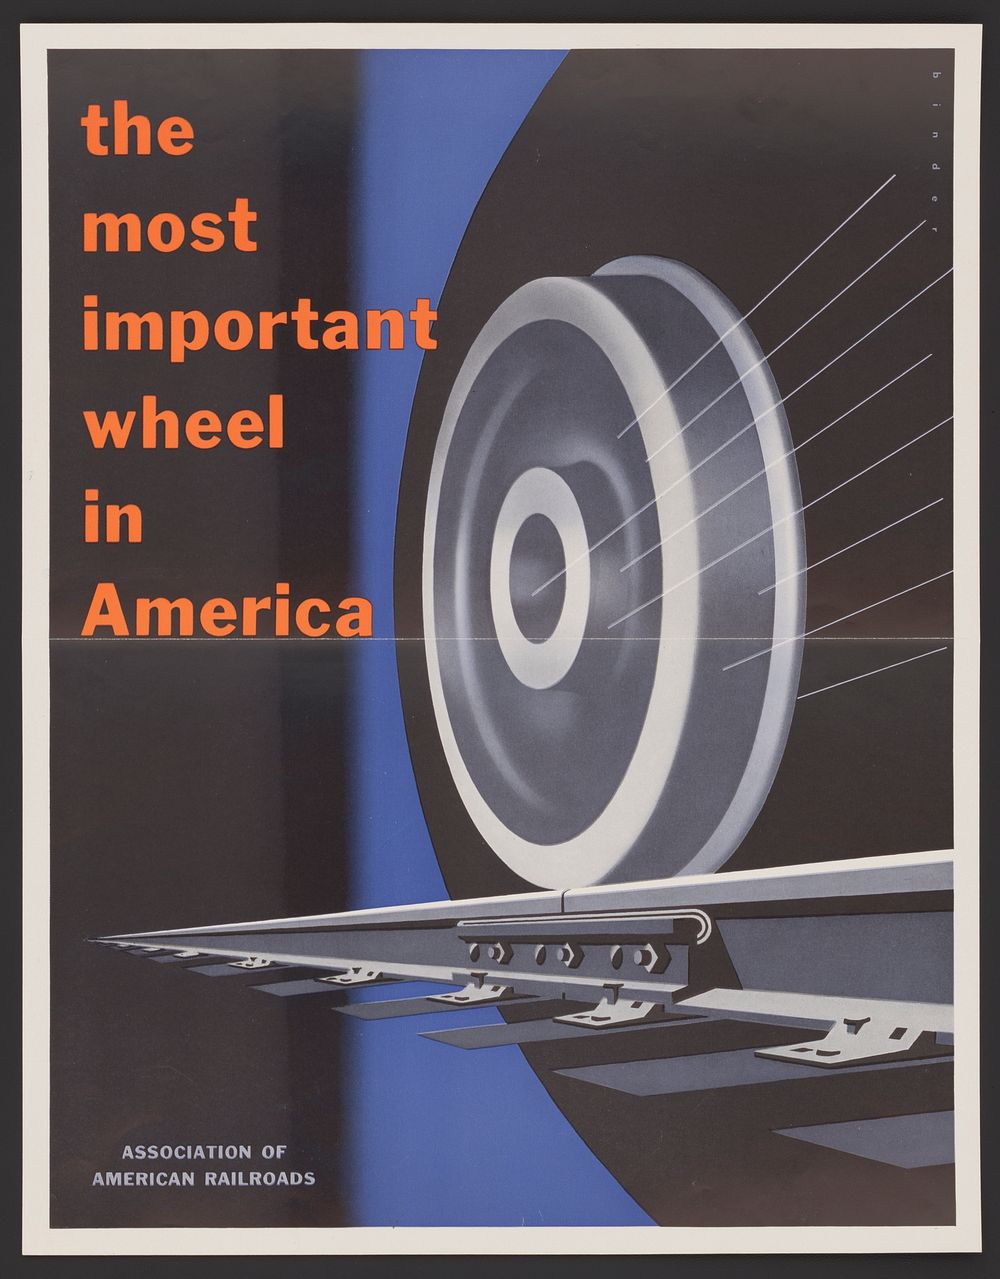 The most important wheels in America (1952) car poster by Joseph Binder. Original public domain image from the Library of…